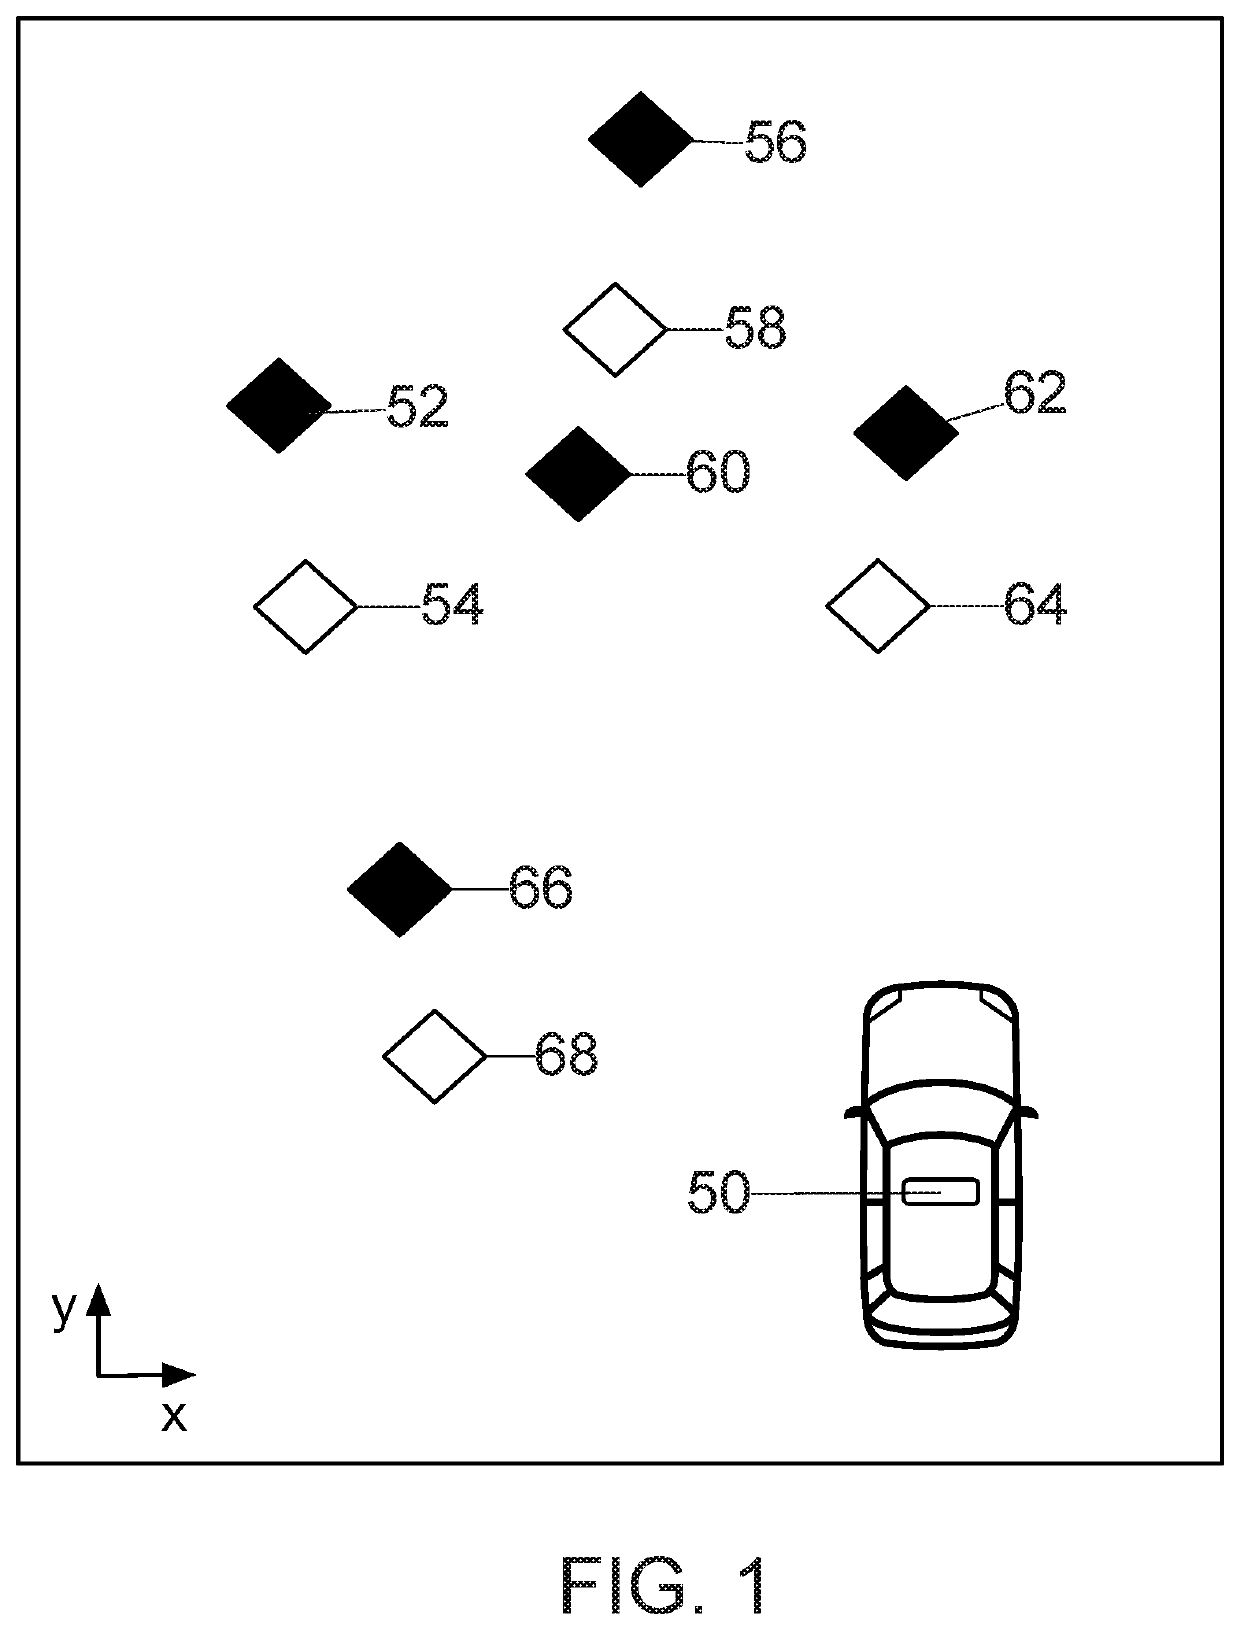 Associating spatial point sets with candidate correspondences